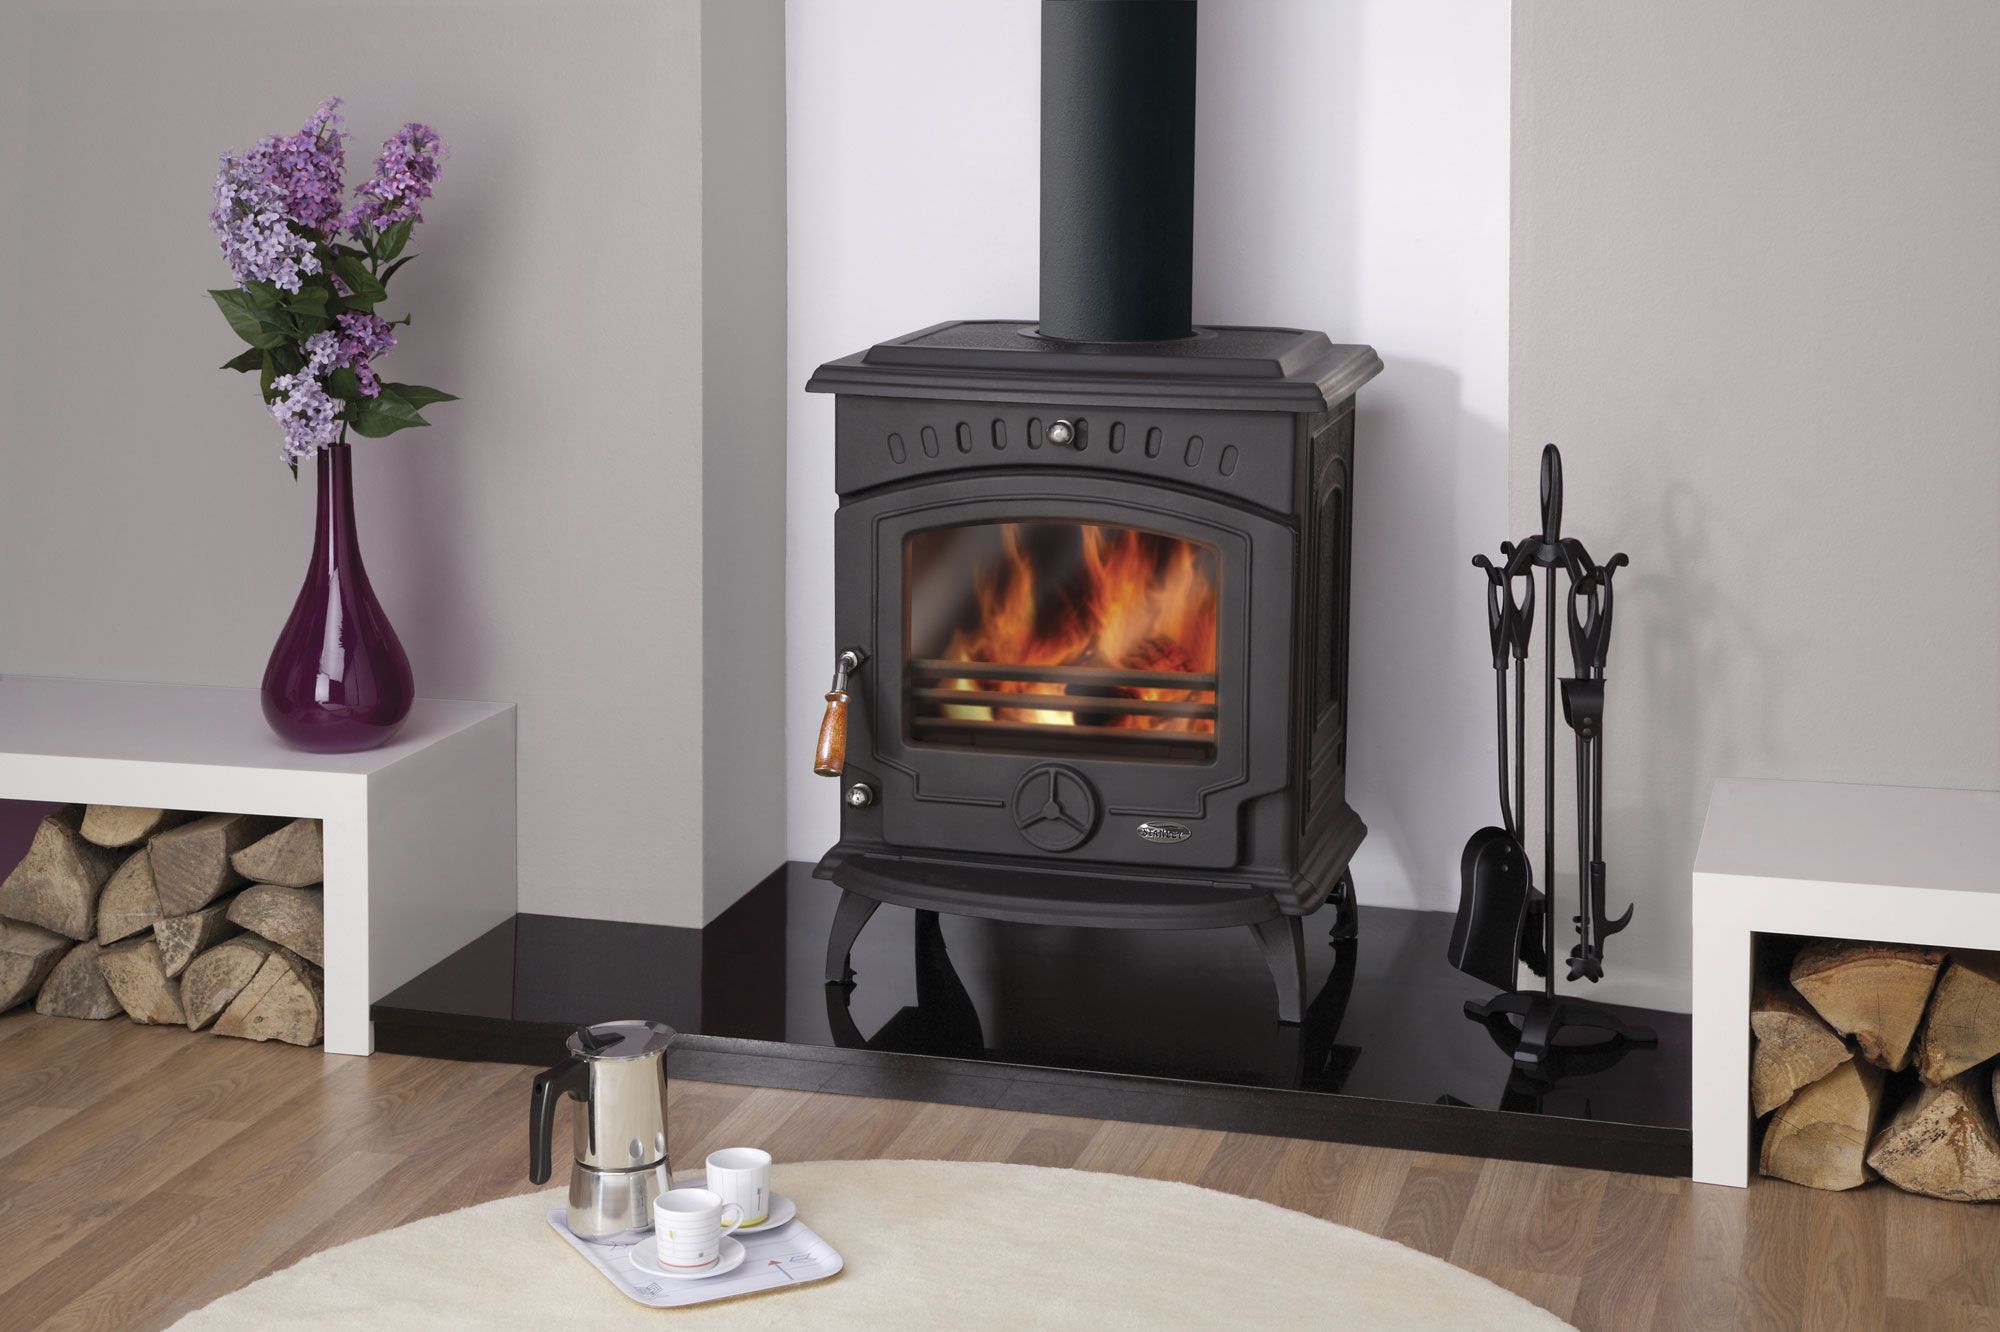 Chesney Fireplace Unique A Medium Sized Stove In Our Collection is the Tara solid